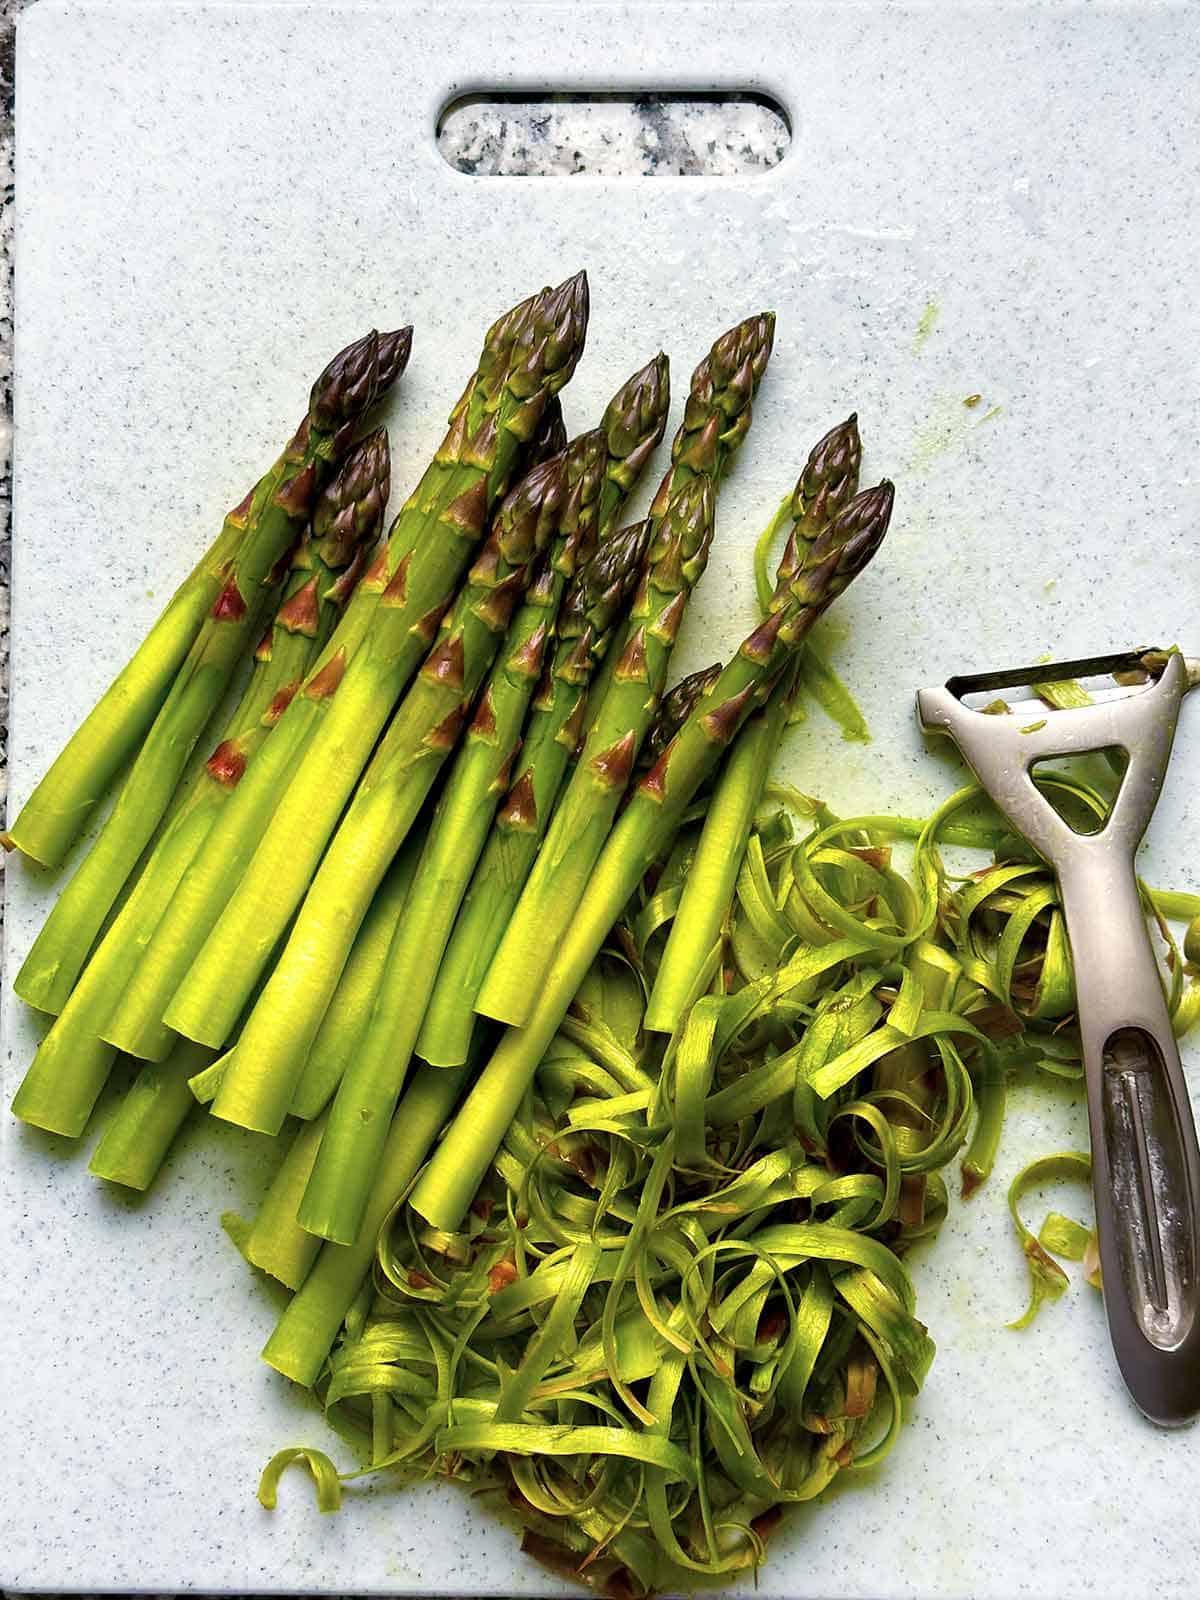 Asparagus that has been peeled on the bottom half, with peelings and the Y-peeler next to them.